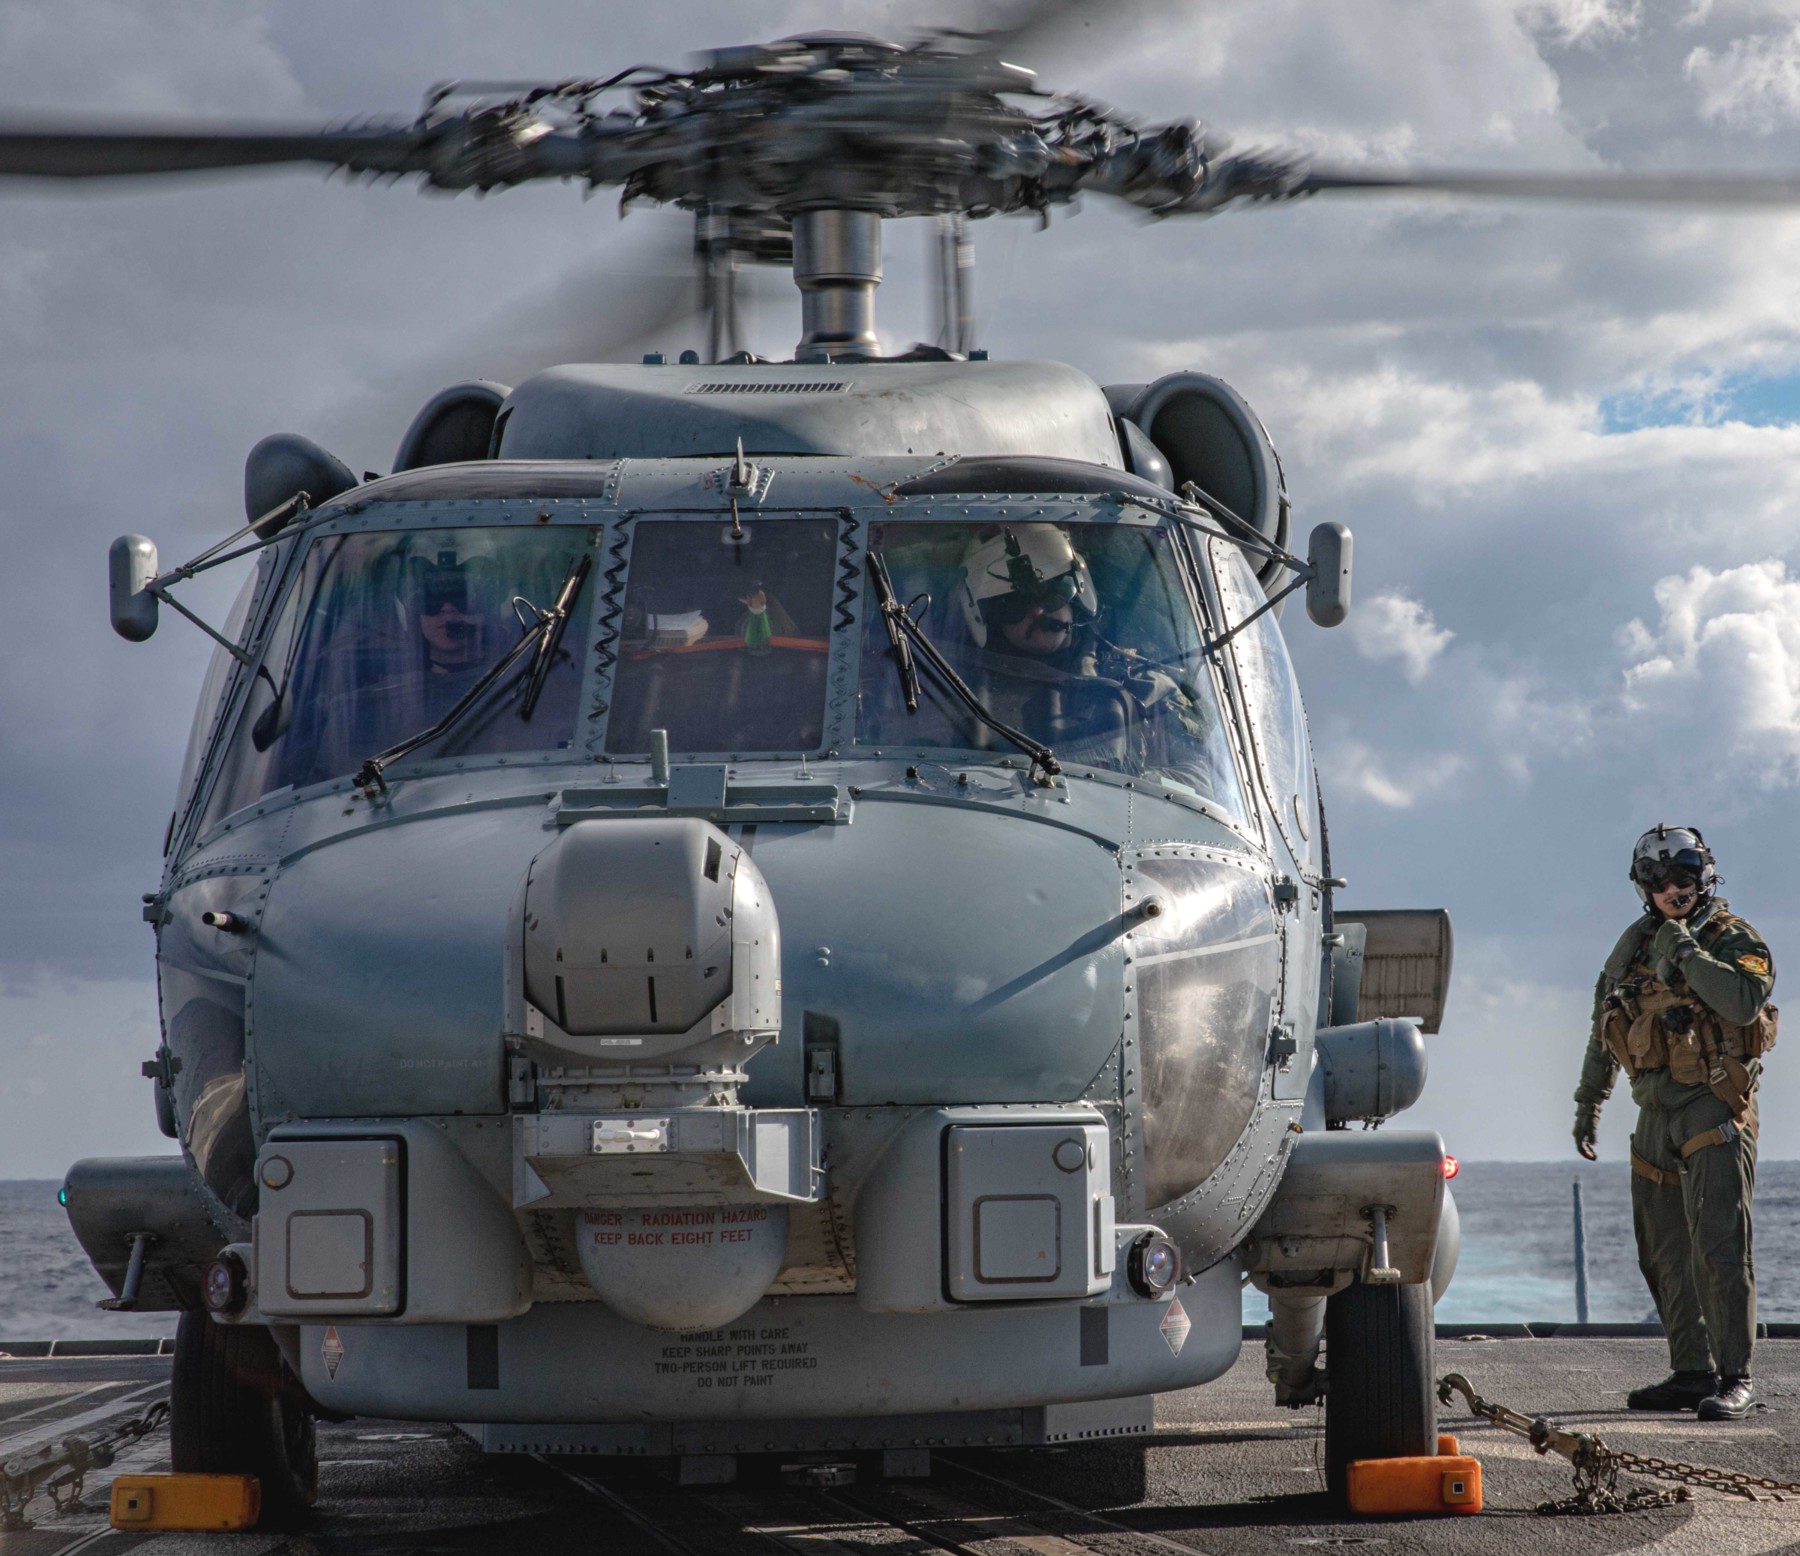 hsm-72 proud warriors helicopter maritime strike squadron mh-60r seahawk carrier air wing cvw-1 61